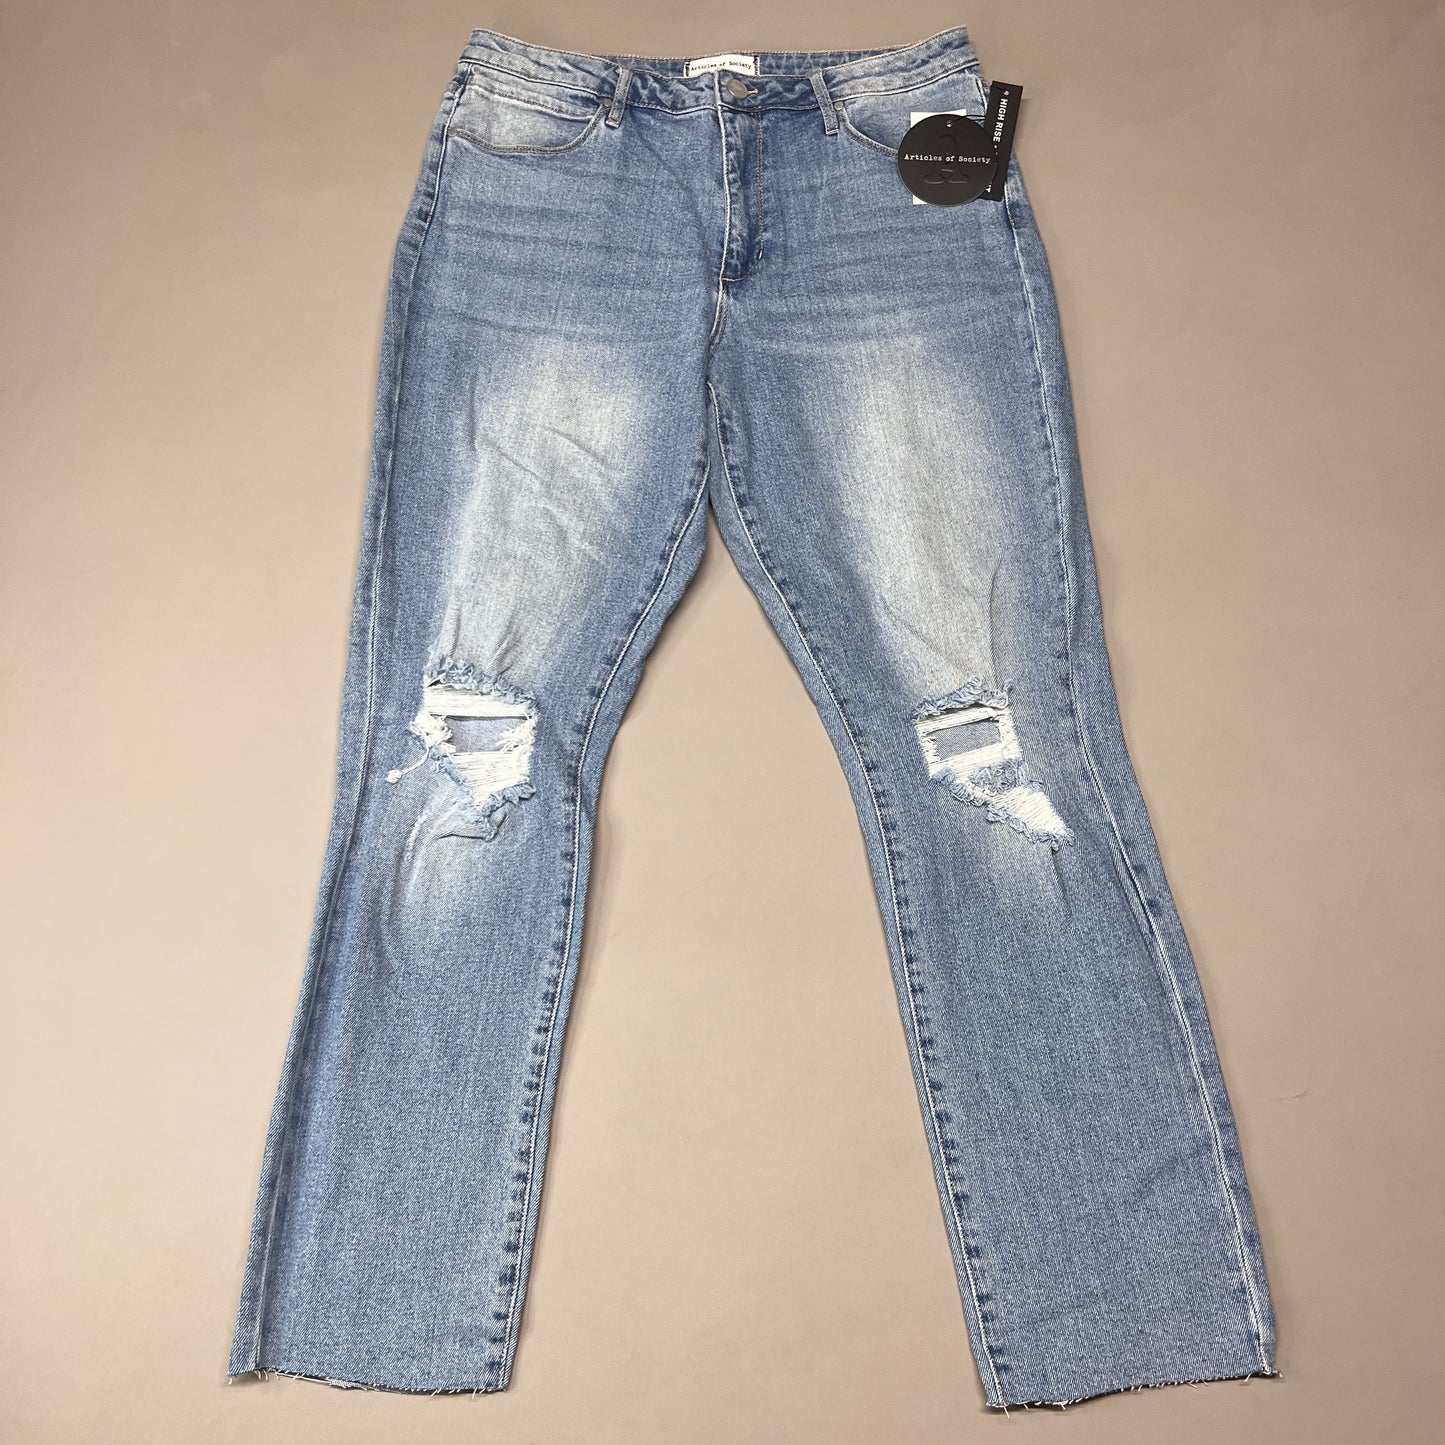 ARTICLES OF SOCIETY Orchidland Ripped Denim Jeans Women's Sz 30 Blue 4009TQ3-717 (New)